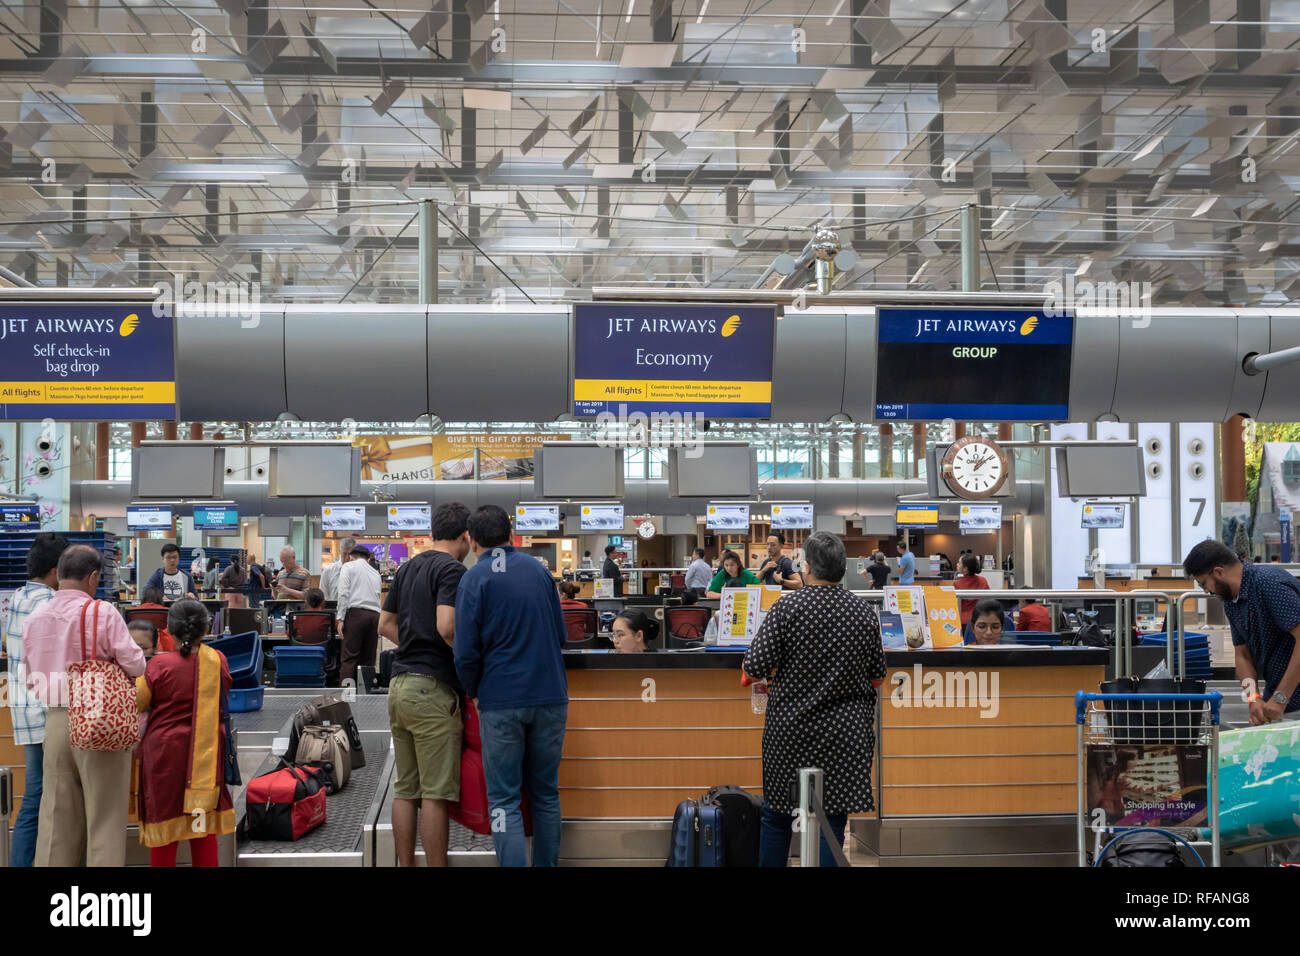 Singapore - January 2019: Jet Airways check-in counter in Singapore Changi Airport. Jet Airways is a major Indian international airline Stock Photo